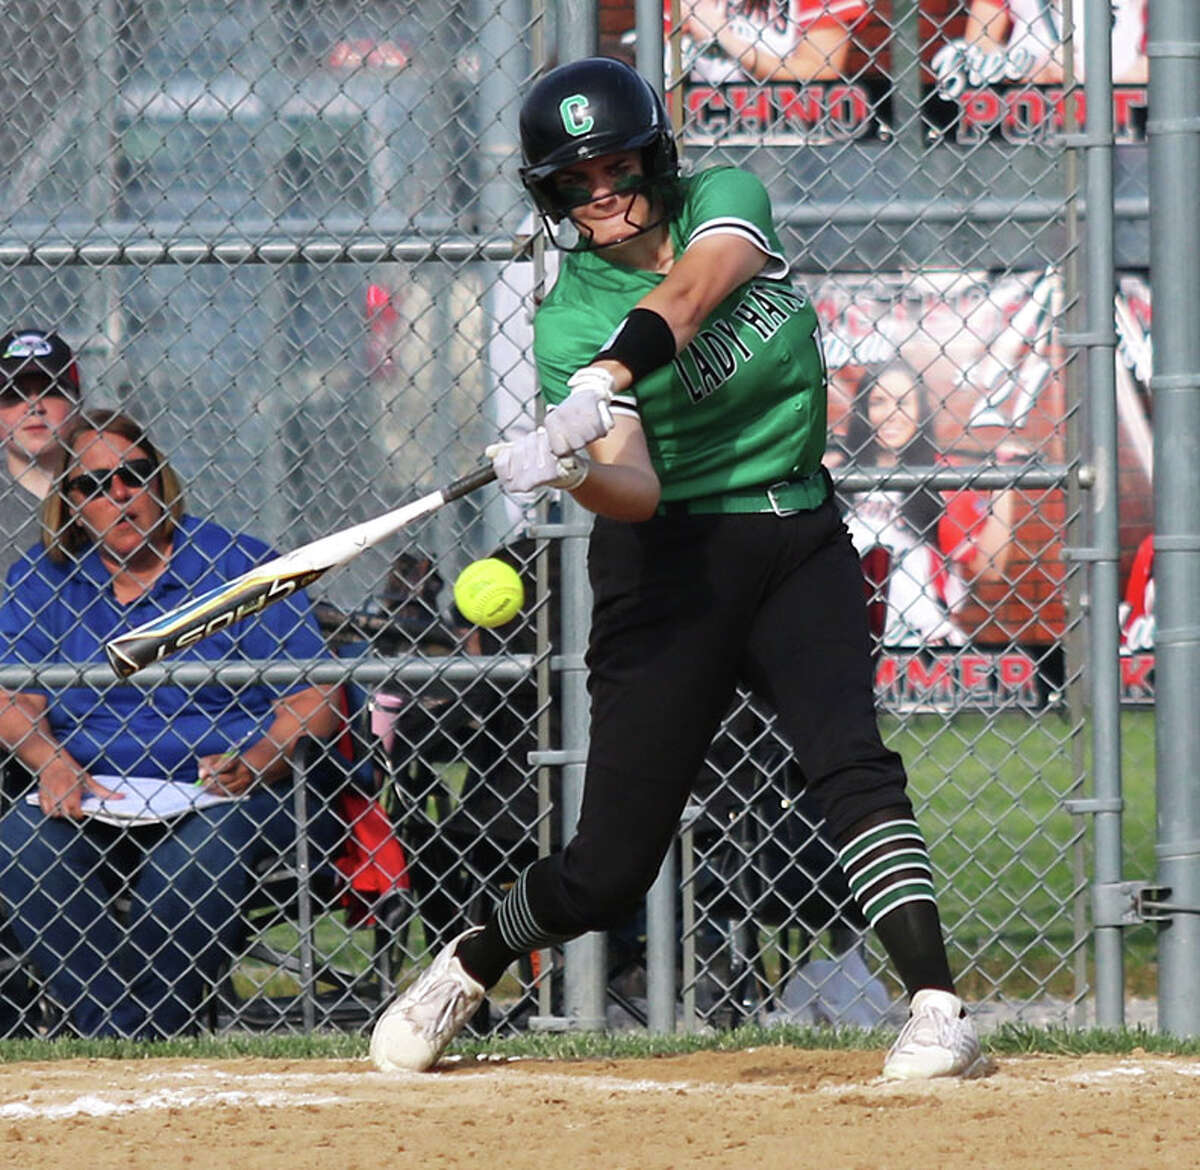 Carrollton's Paige Henson swings at a pitch against Marissa on Tuesday in a semifinal at the Marissa Class 1A Sectional.